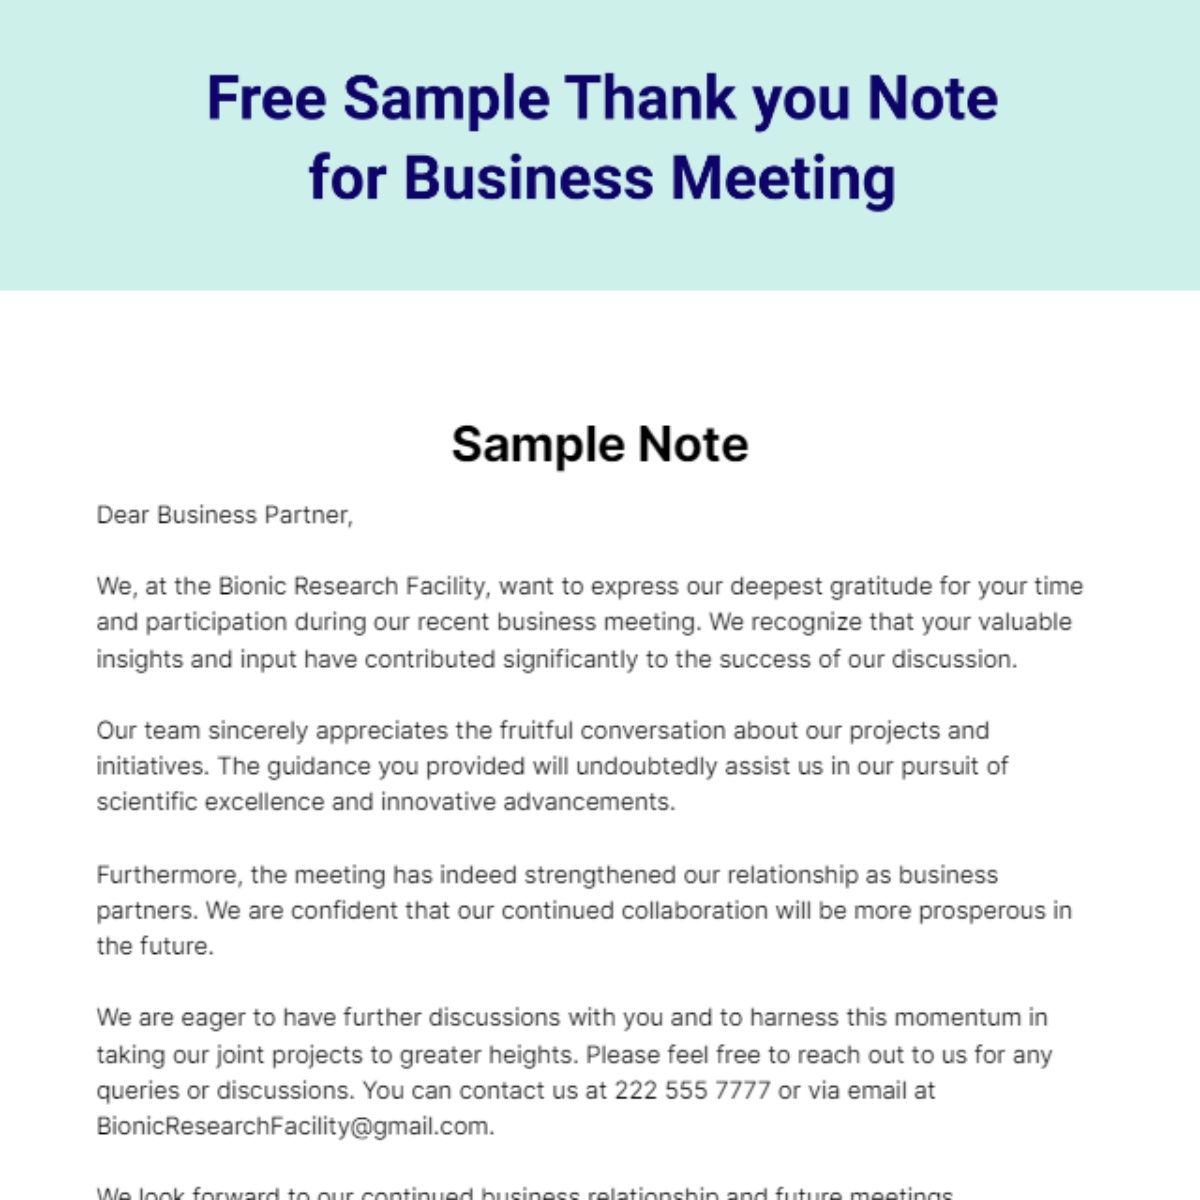 Sample Thank you Note for Business Meeting Template